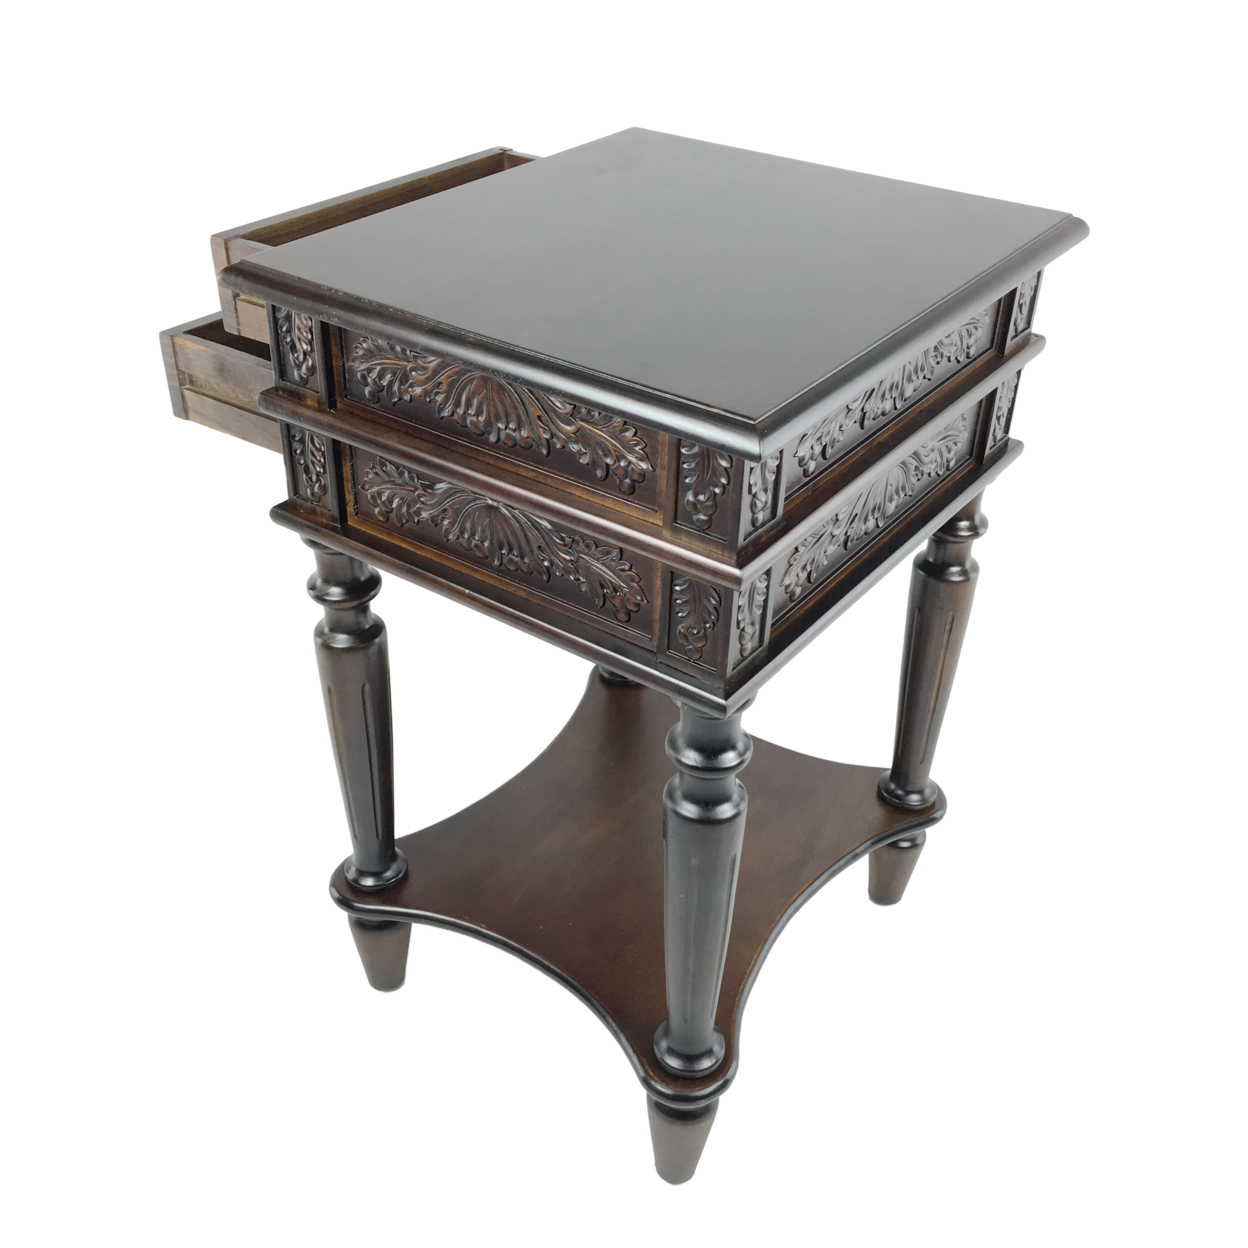 2 Drawer End Table With Intricate Carvings And Open Bottom Shelf, Brown- Saltoro Sherpi